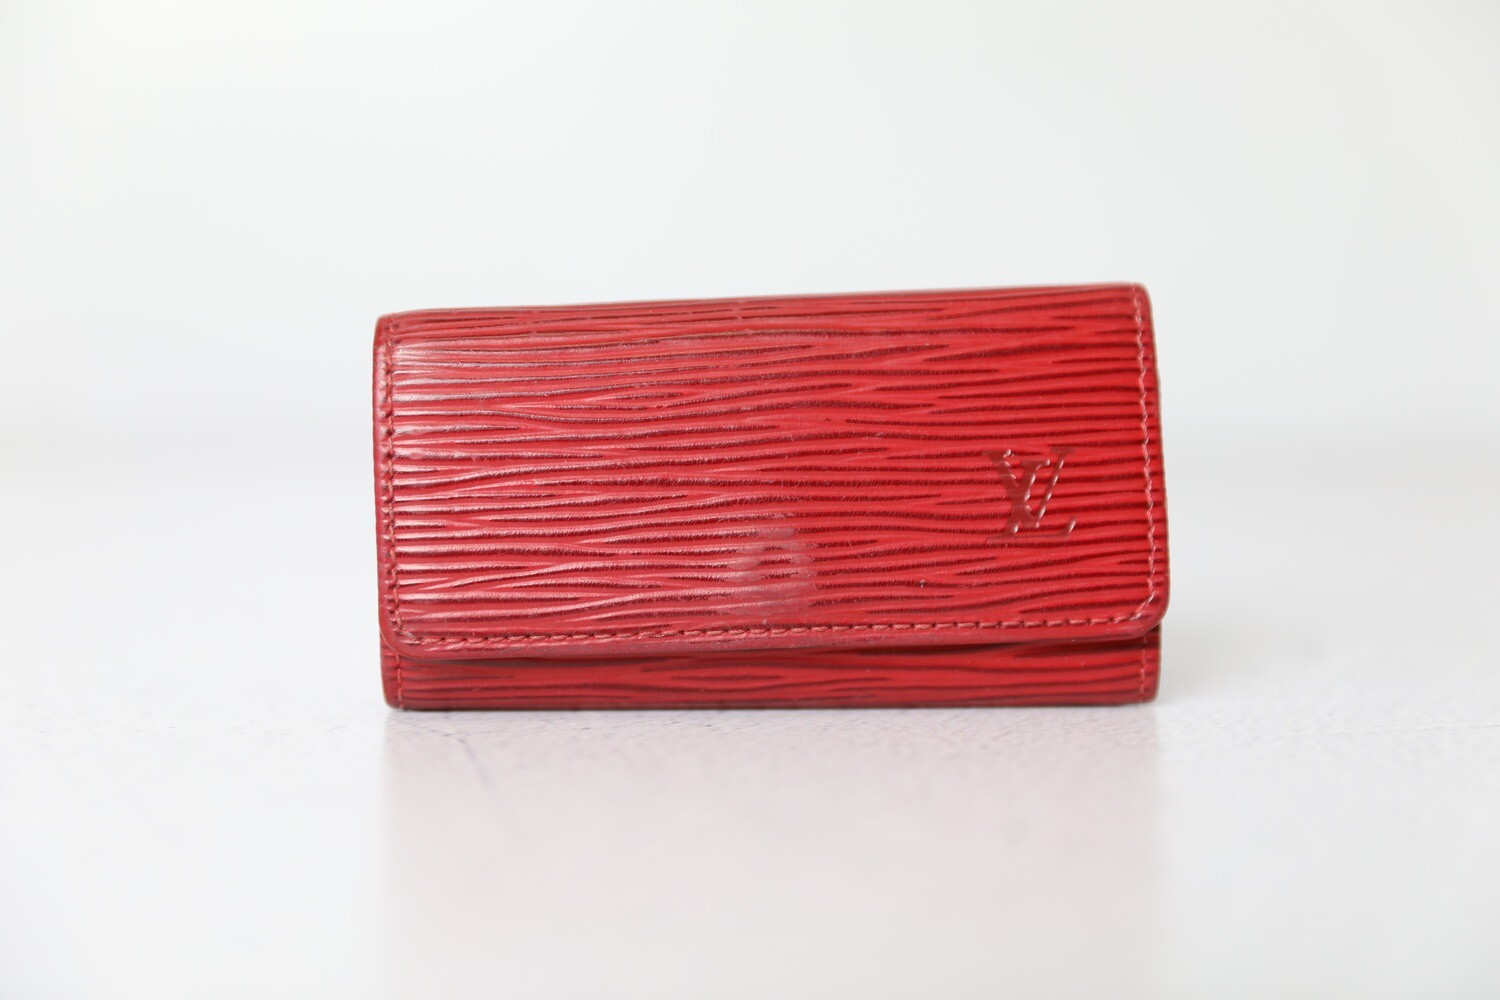 Louis Vuitton Key Holder Wallet, Red Epi, Preowned No Dustbag